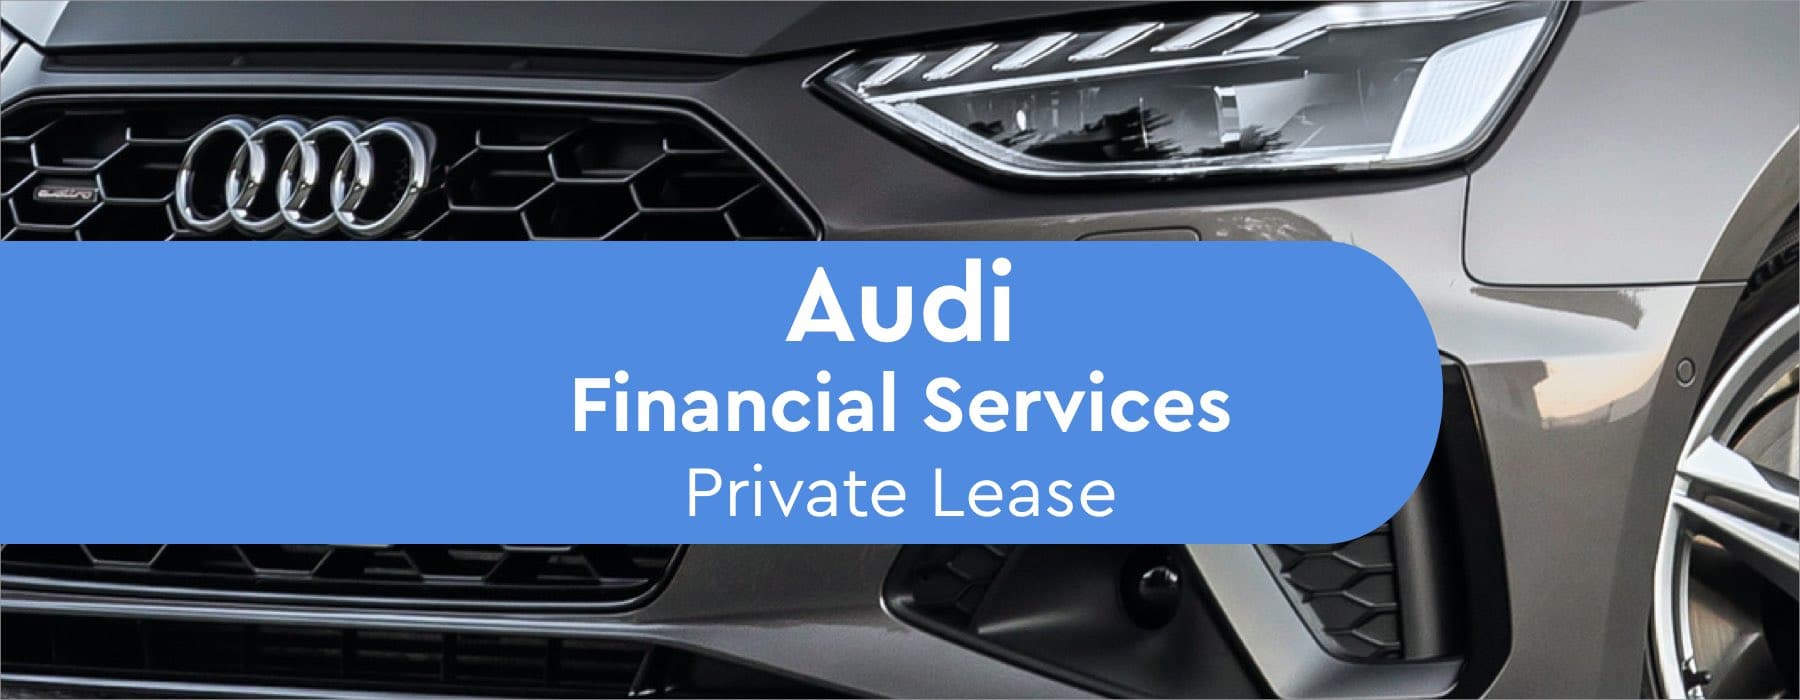 audi financial services Private Lease